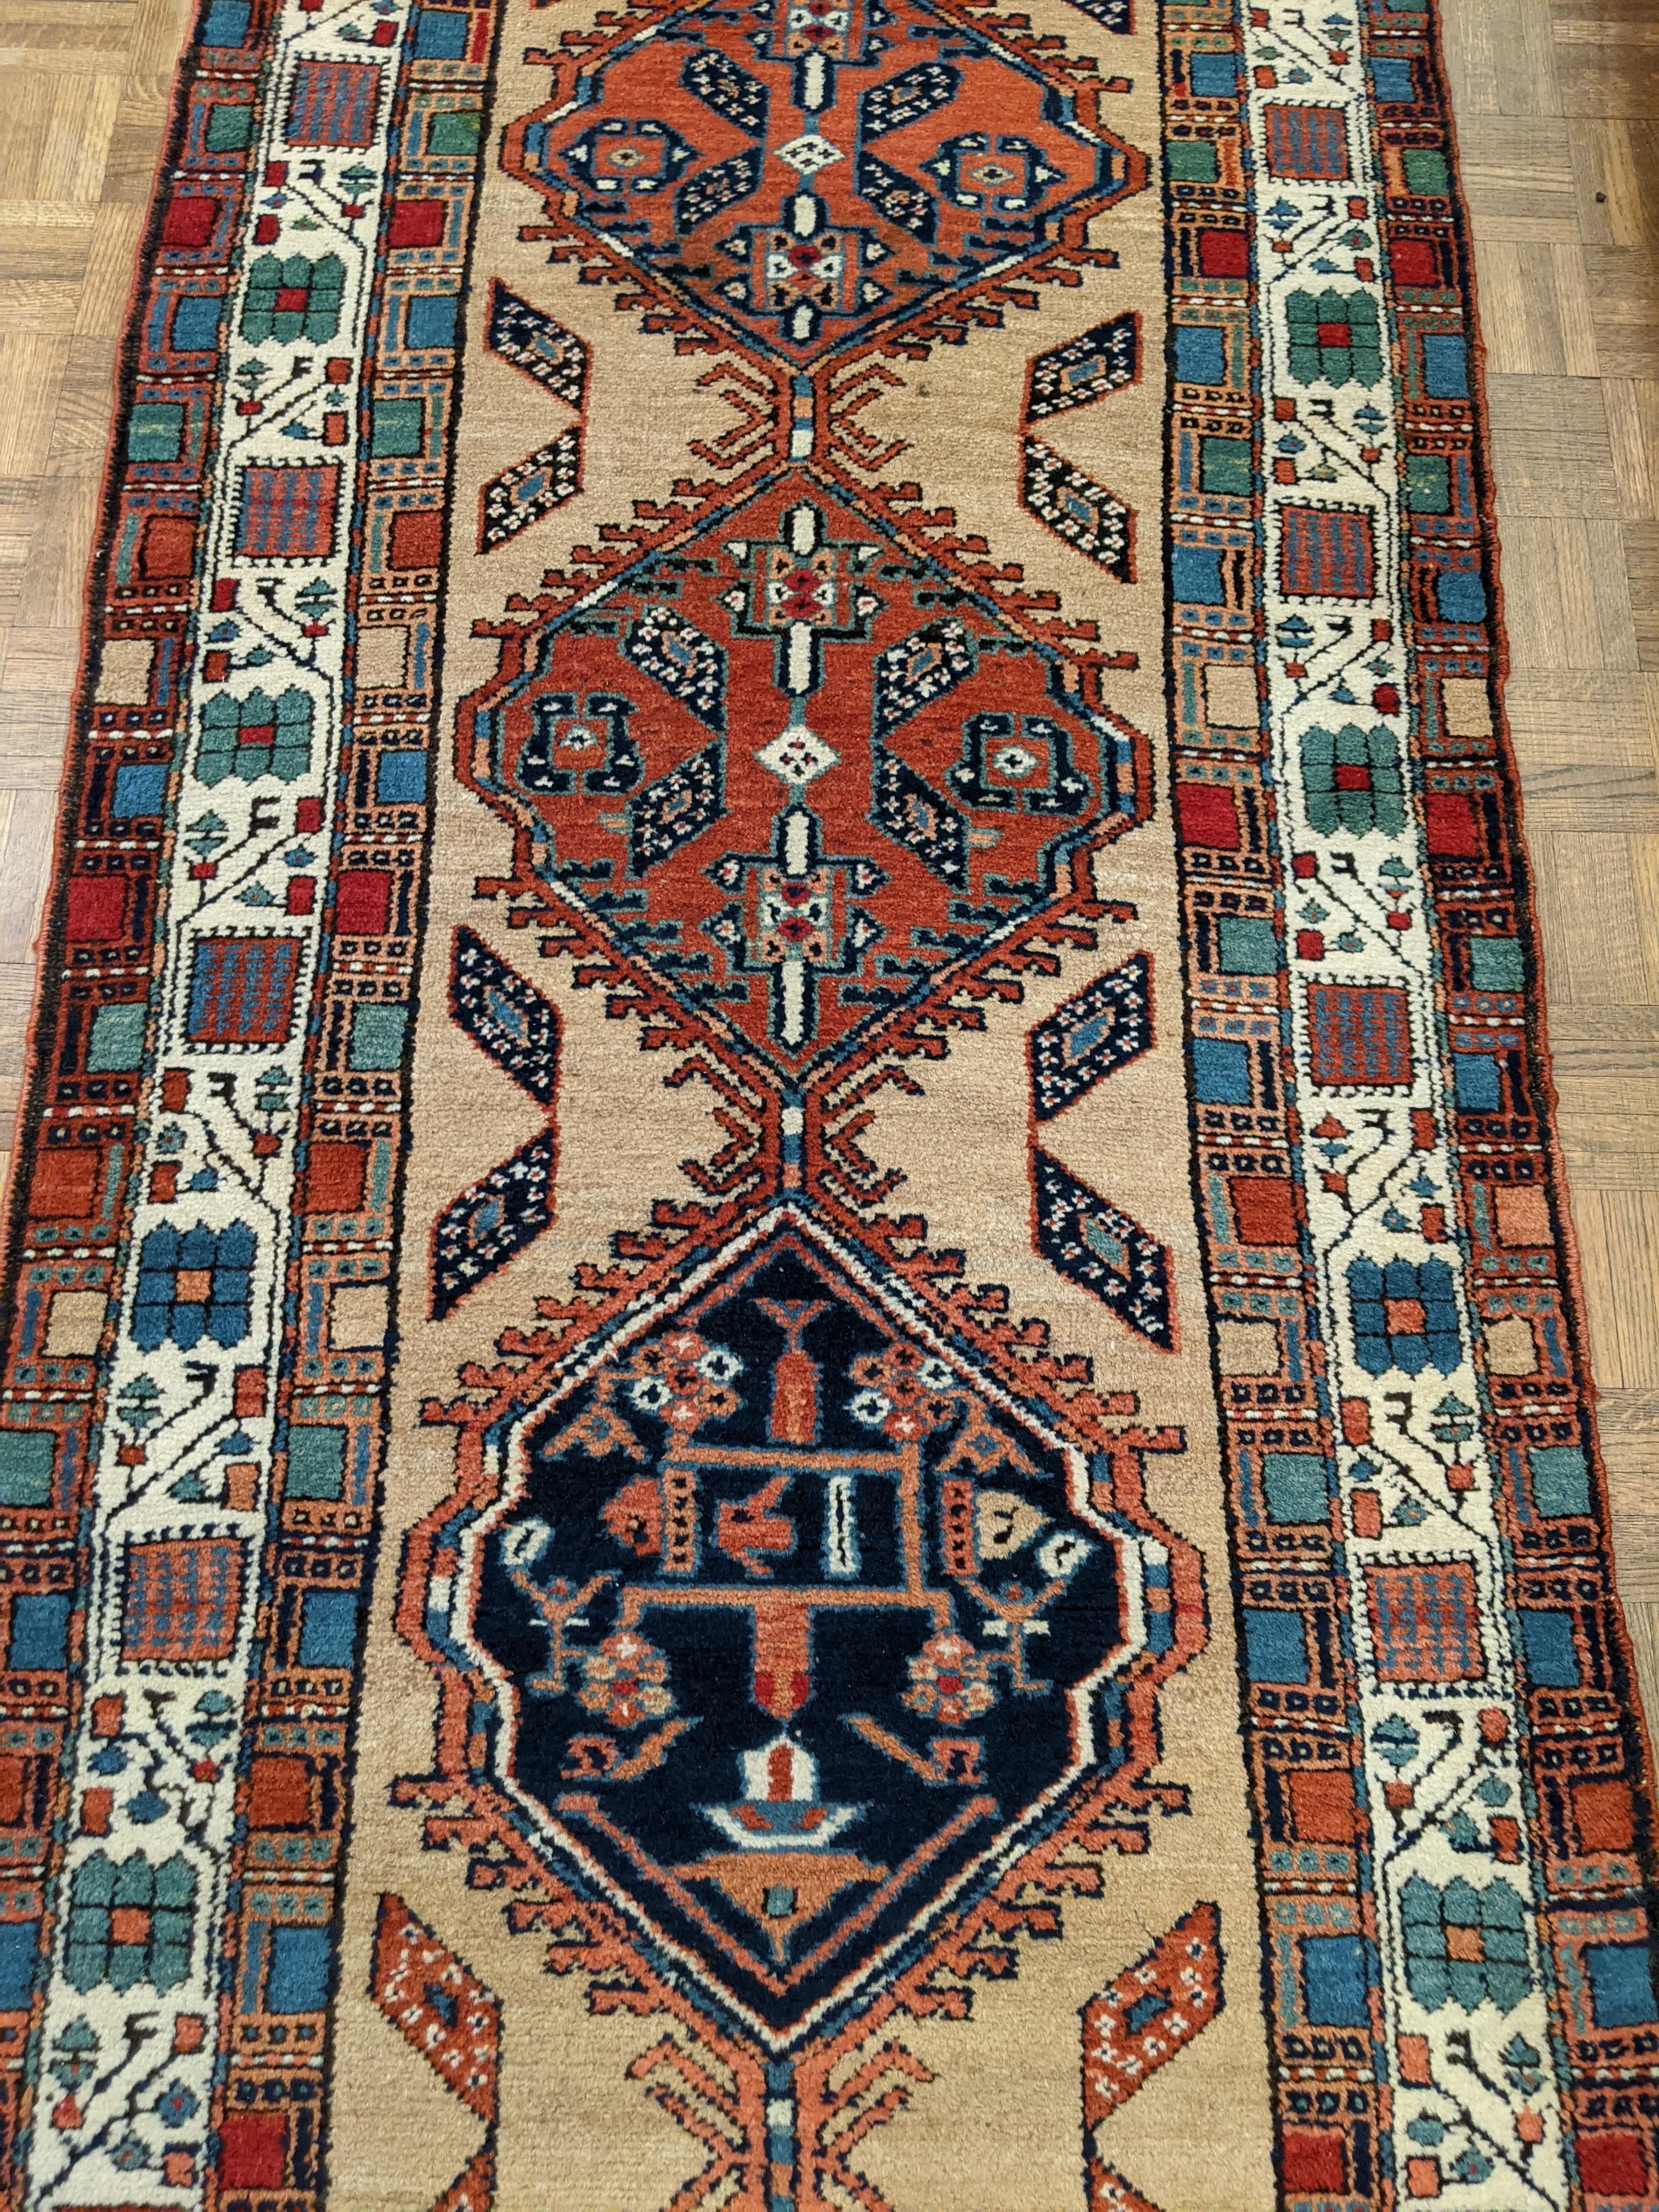 This is a striking antique Persian Serab. Serab rugs are known for their geometric design as well as the use of camel color. The typical Serab motif with the use of a cinnamon rust color is accented on the camel field. This rug is 3-1x12-6 and is